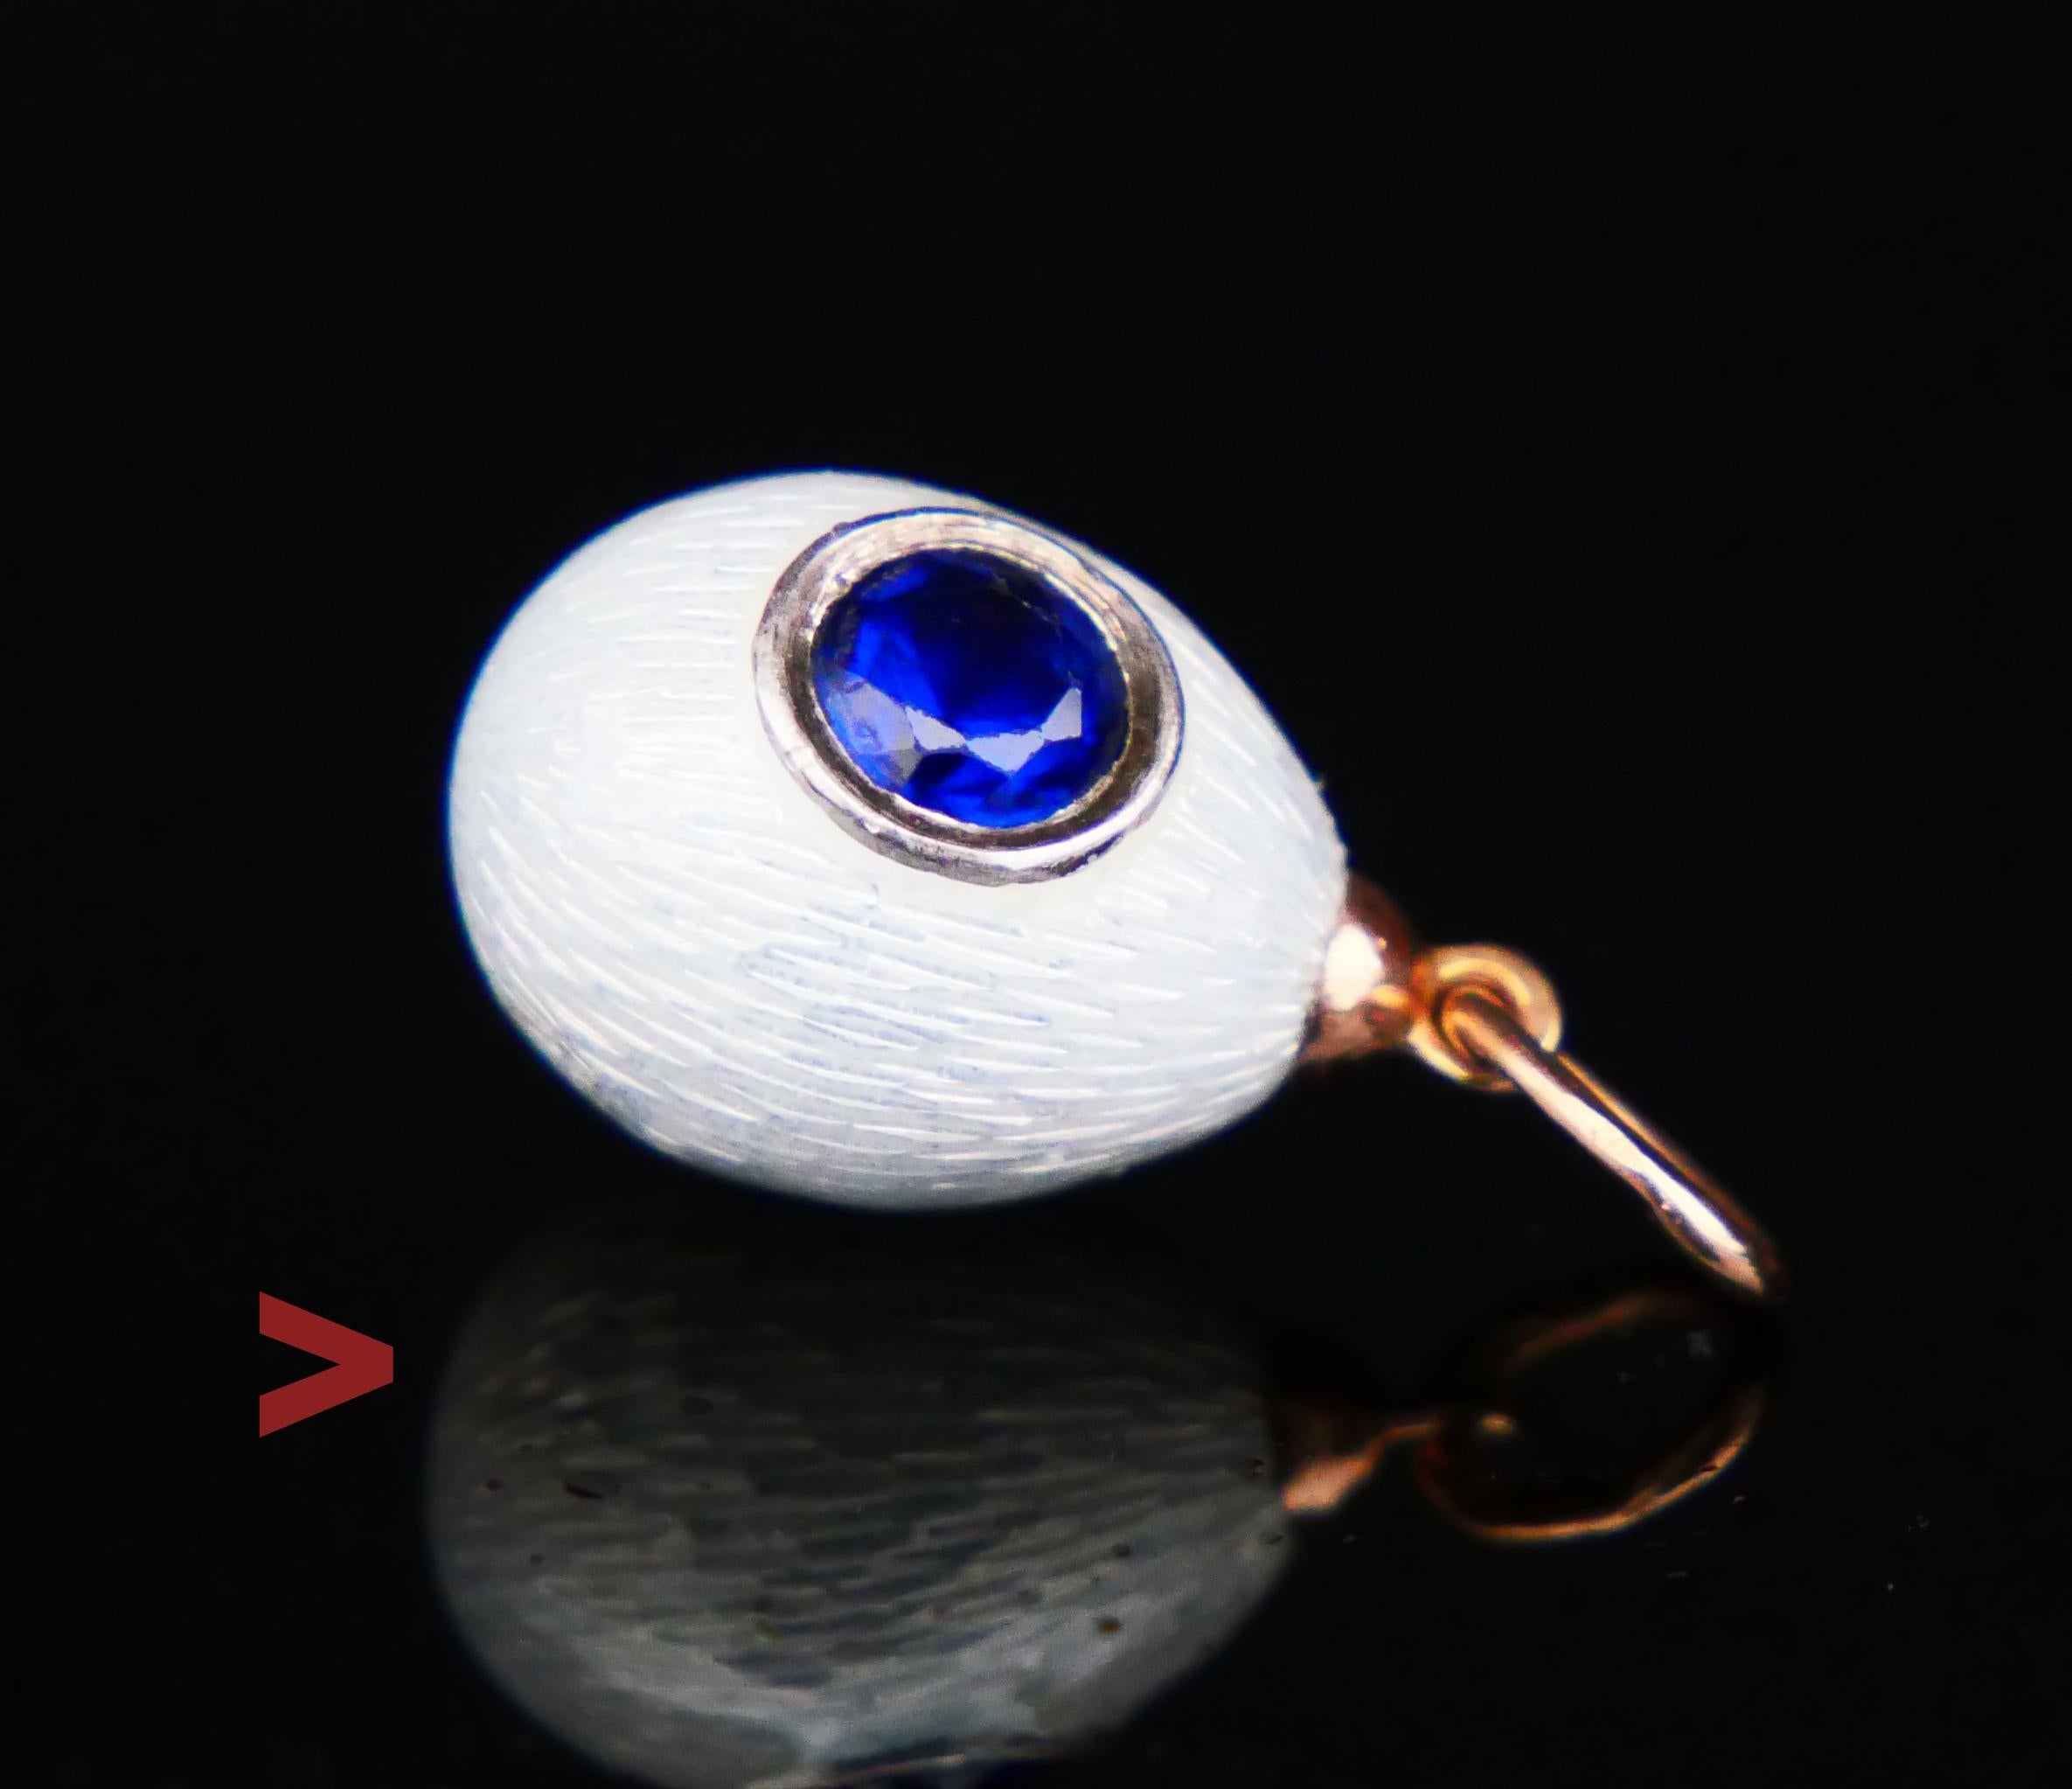 Antique miniature Passover Egg pendant made in Imperial Russia between the years 1898 - 1908.

Body in Silver finished with White Pearl Enamel and is embellished with an old diamond - cut Blue Sapphire Ø 5.5 mm / ca.0.8 ct set in a silver bezel

The